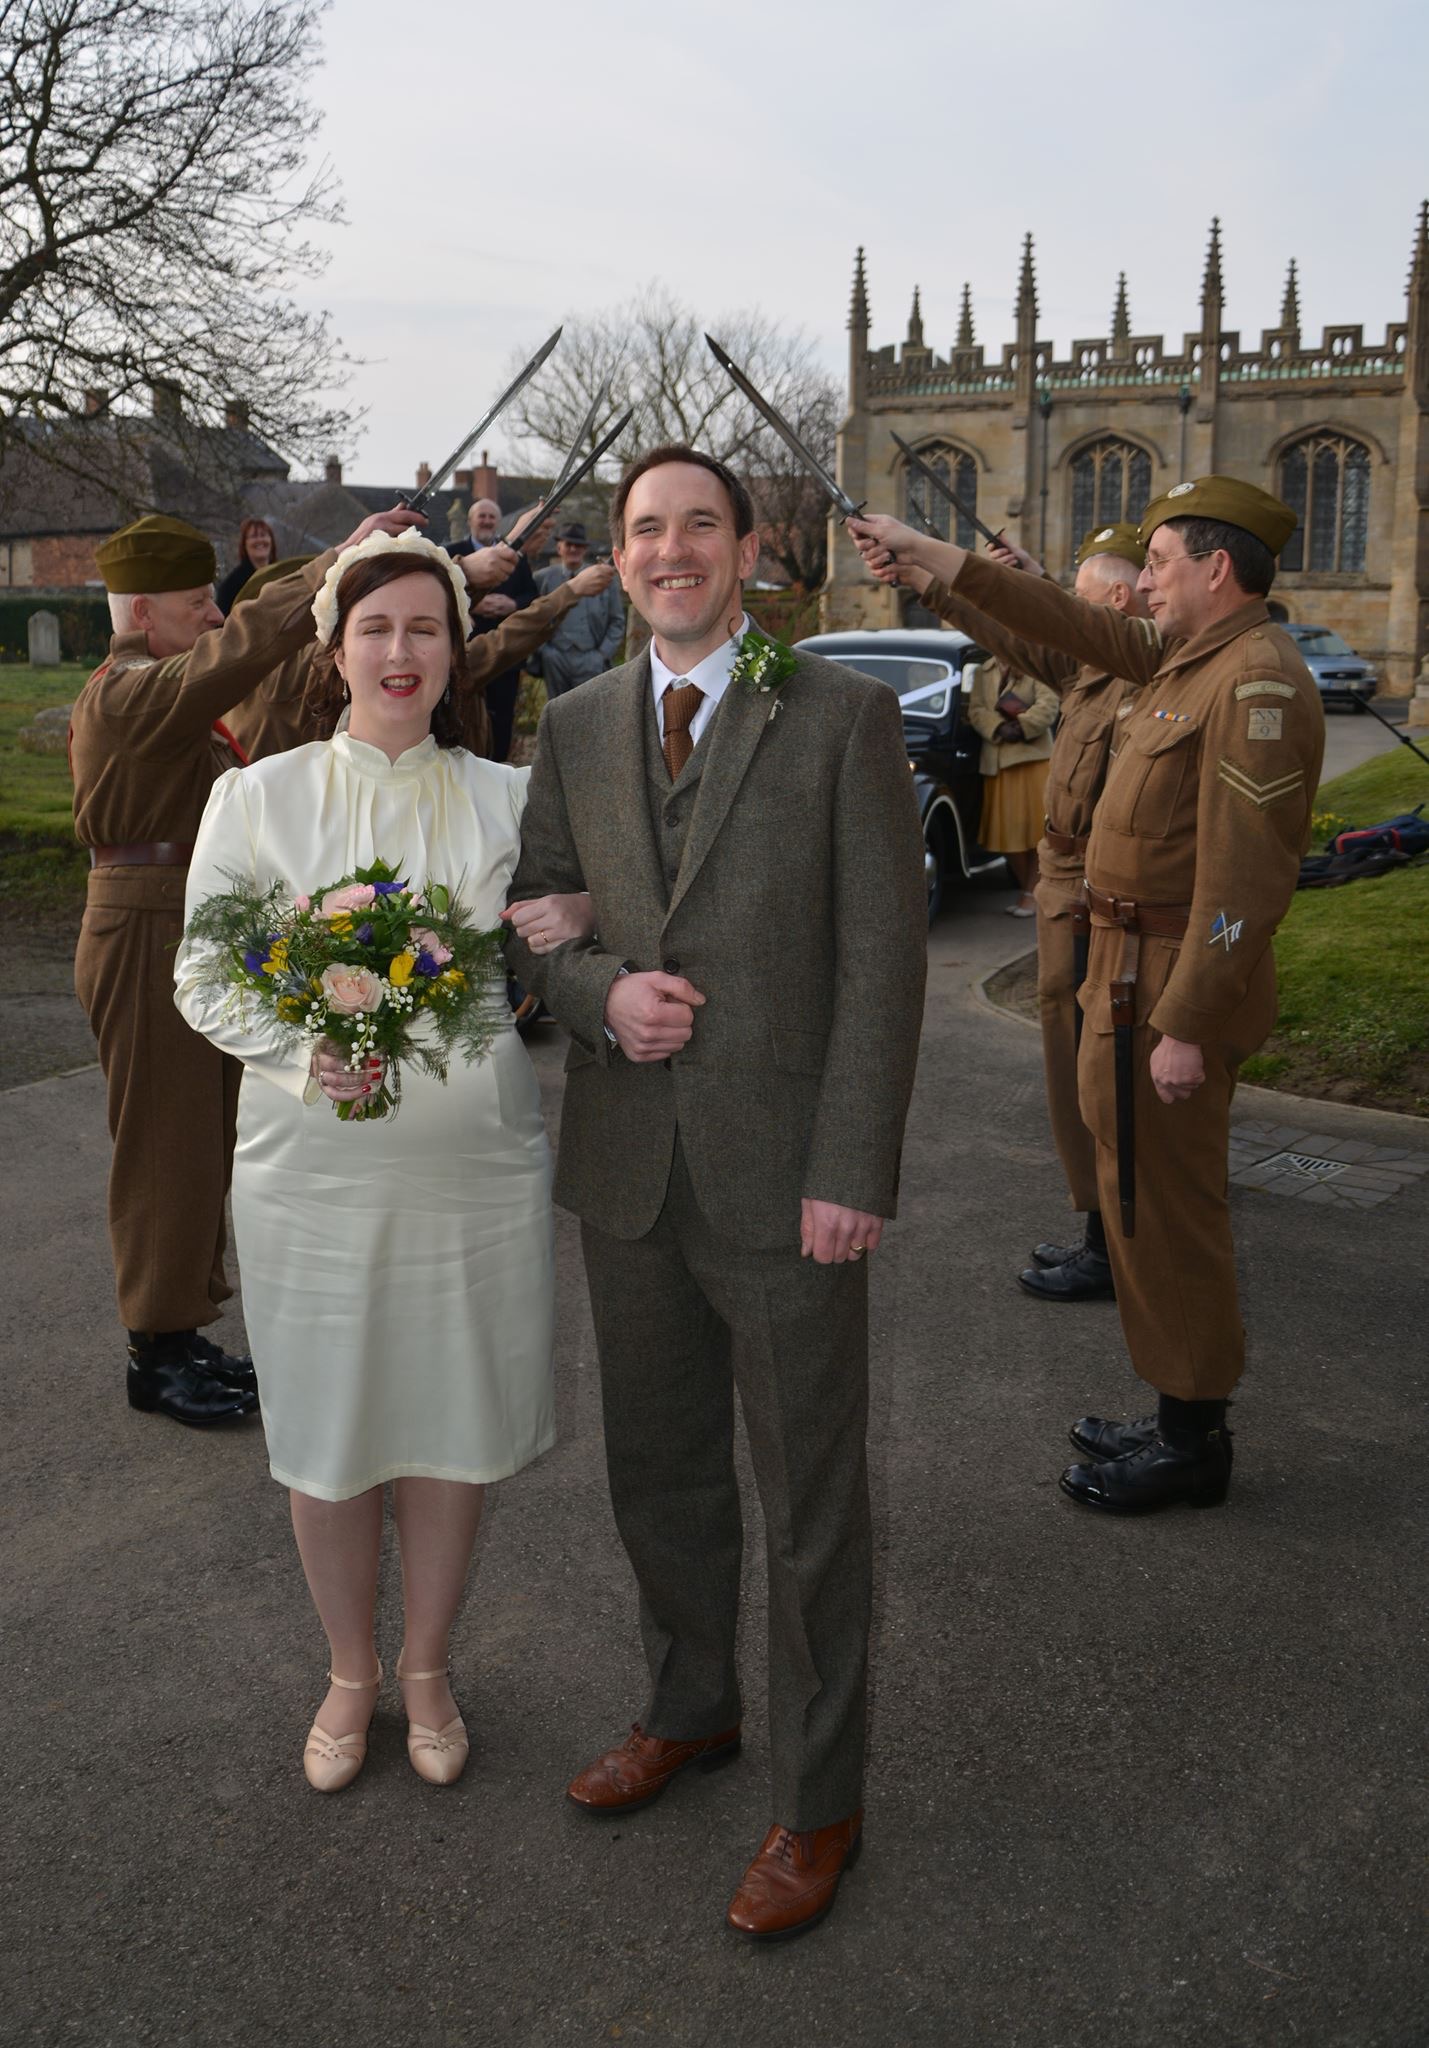 PHOTO: Ria Chambers and Jonathan Jefferies held a 1940s-themed wedding on March 12, 2016 in Bedfordshire, England.